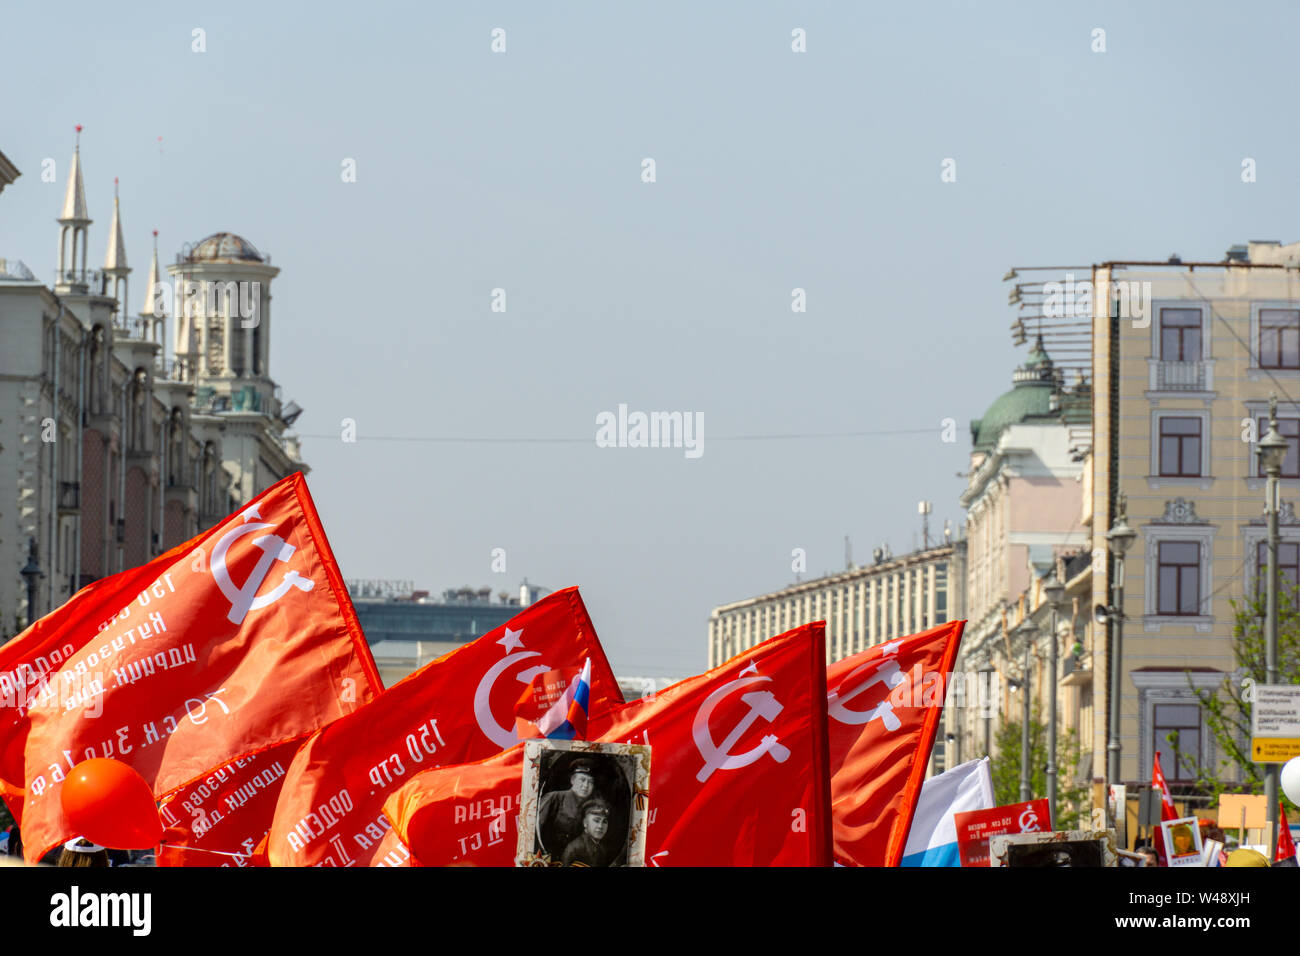 MOSCOW, RUSSIA - MAY 9, 2019: The flag of the Soviet Union USSR waving in the wind. Stock Photo